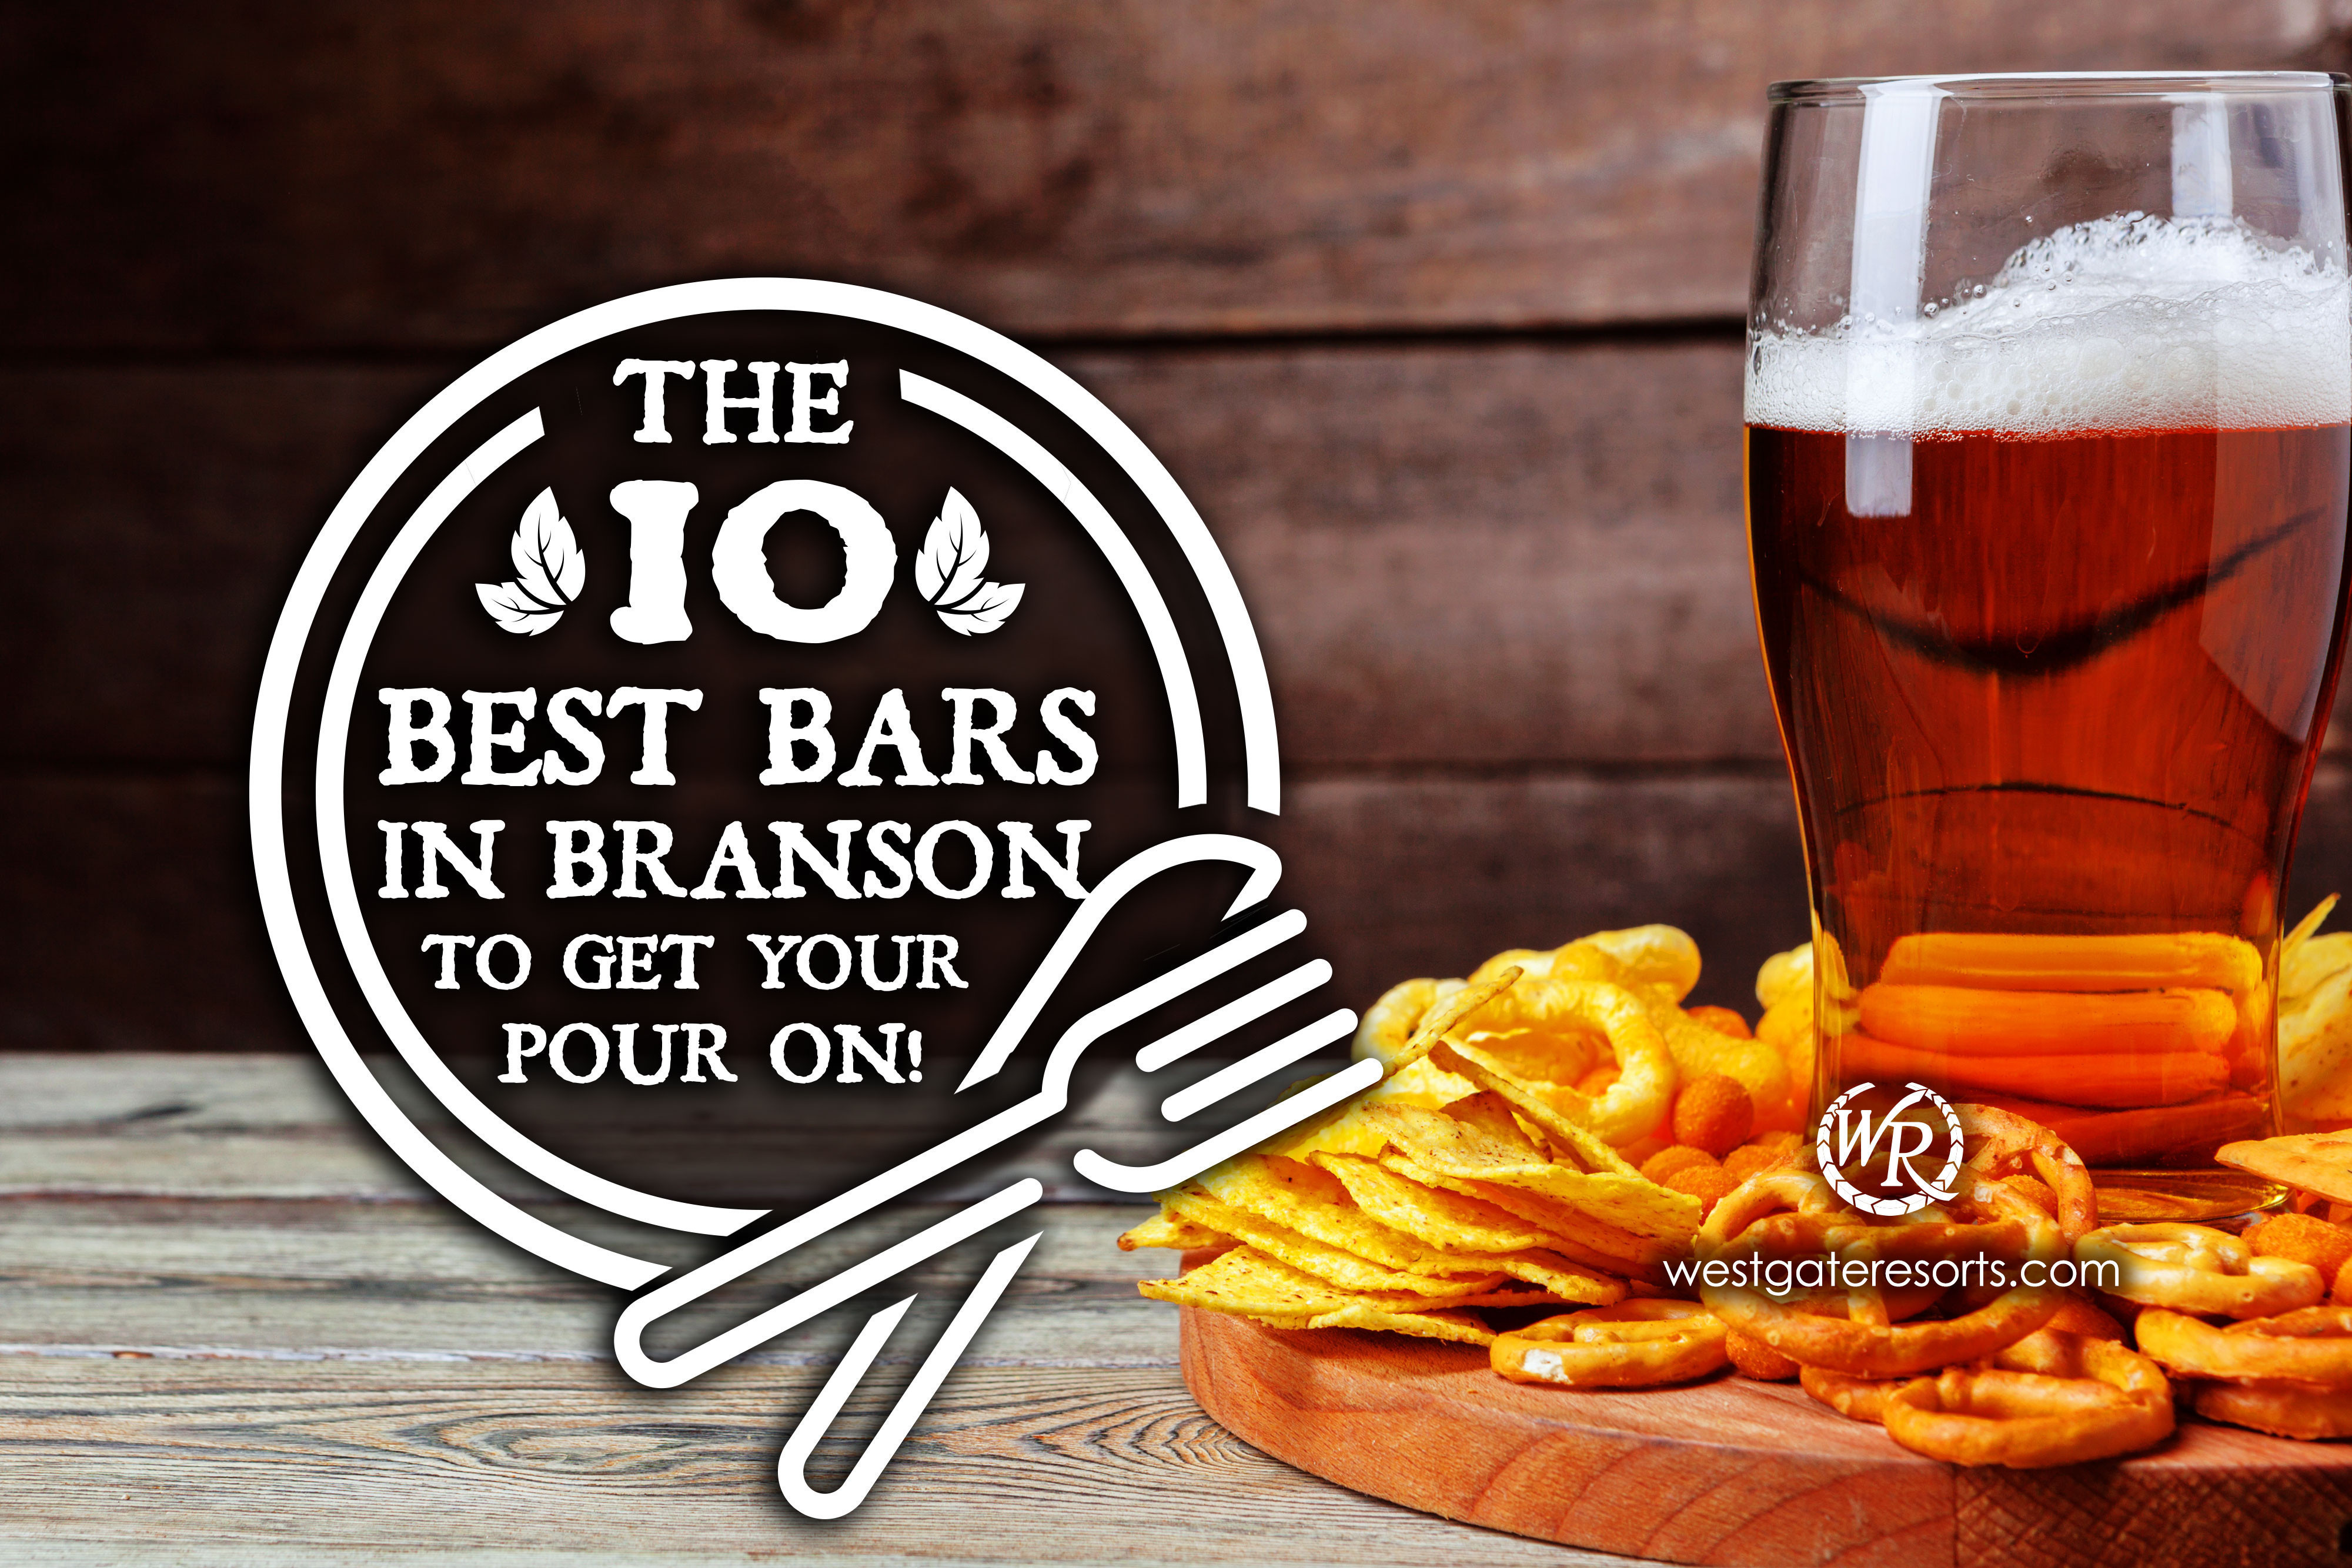 Best Bars in Branson to Get Your Pour On!